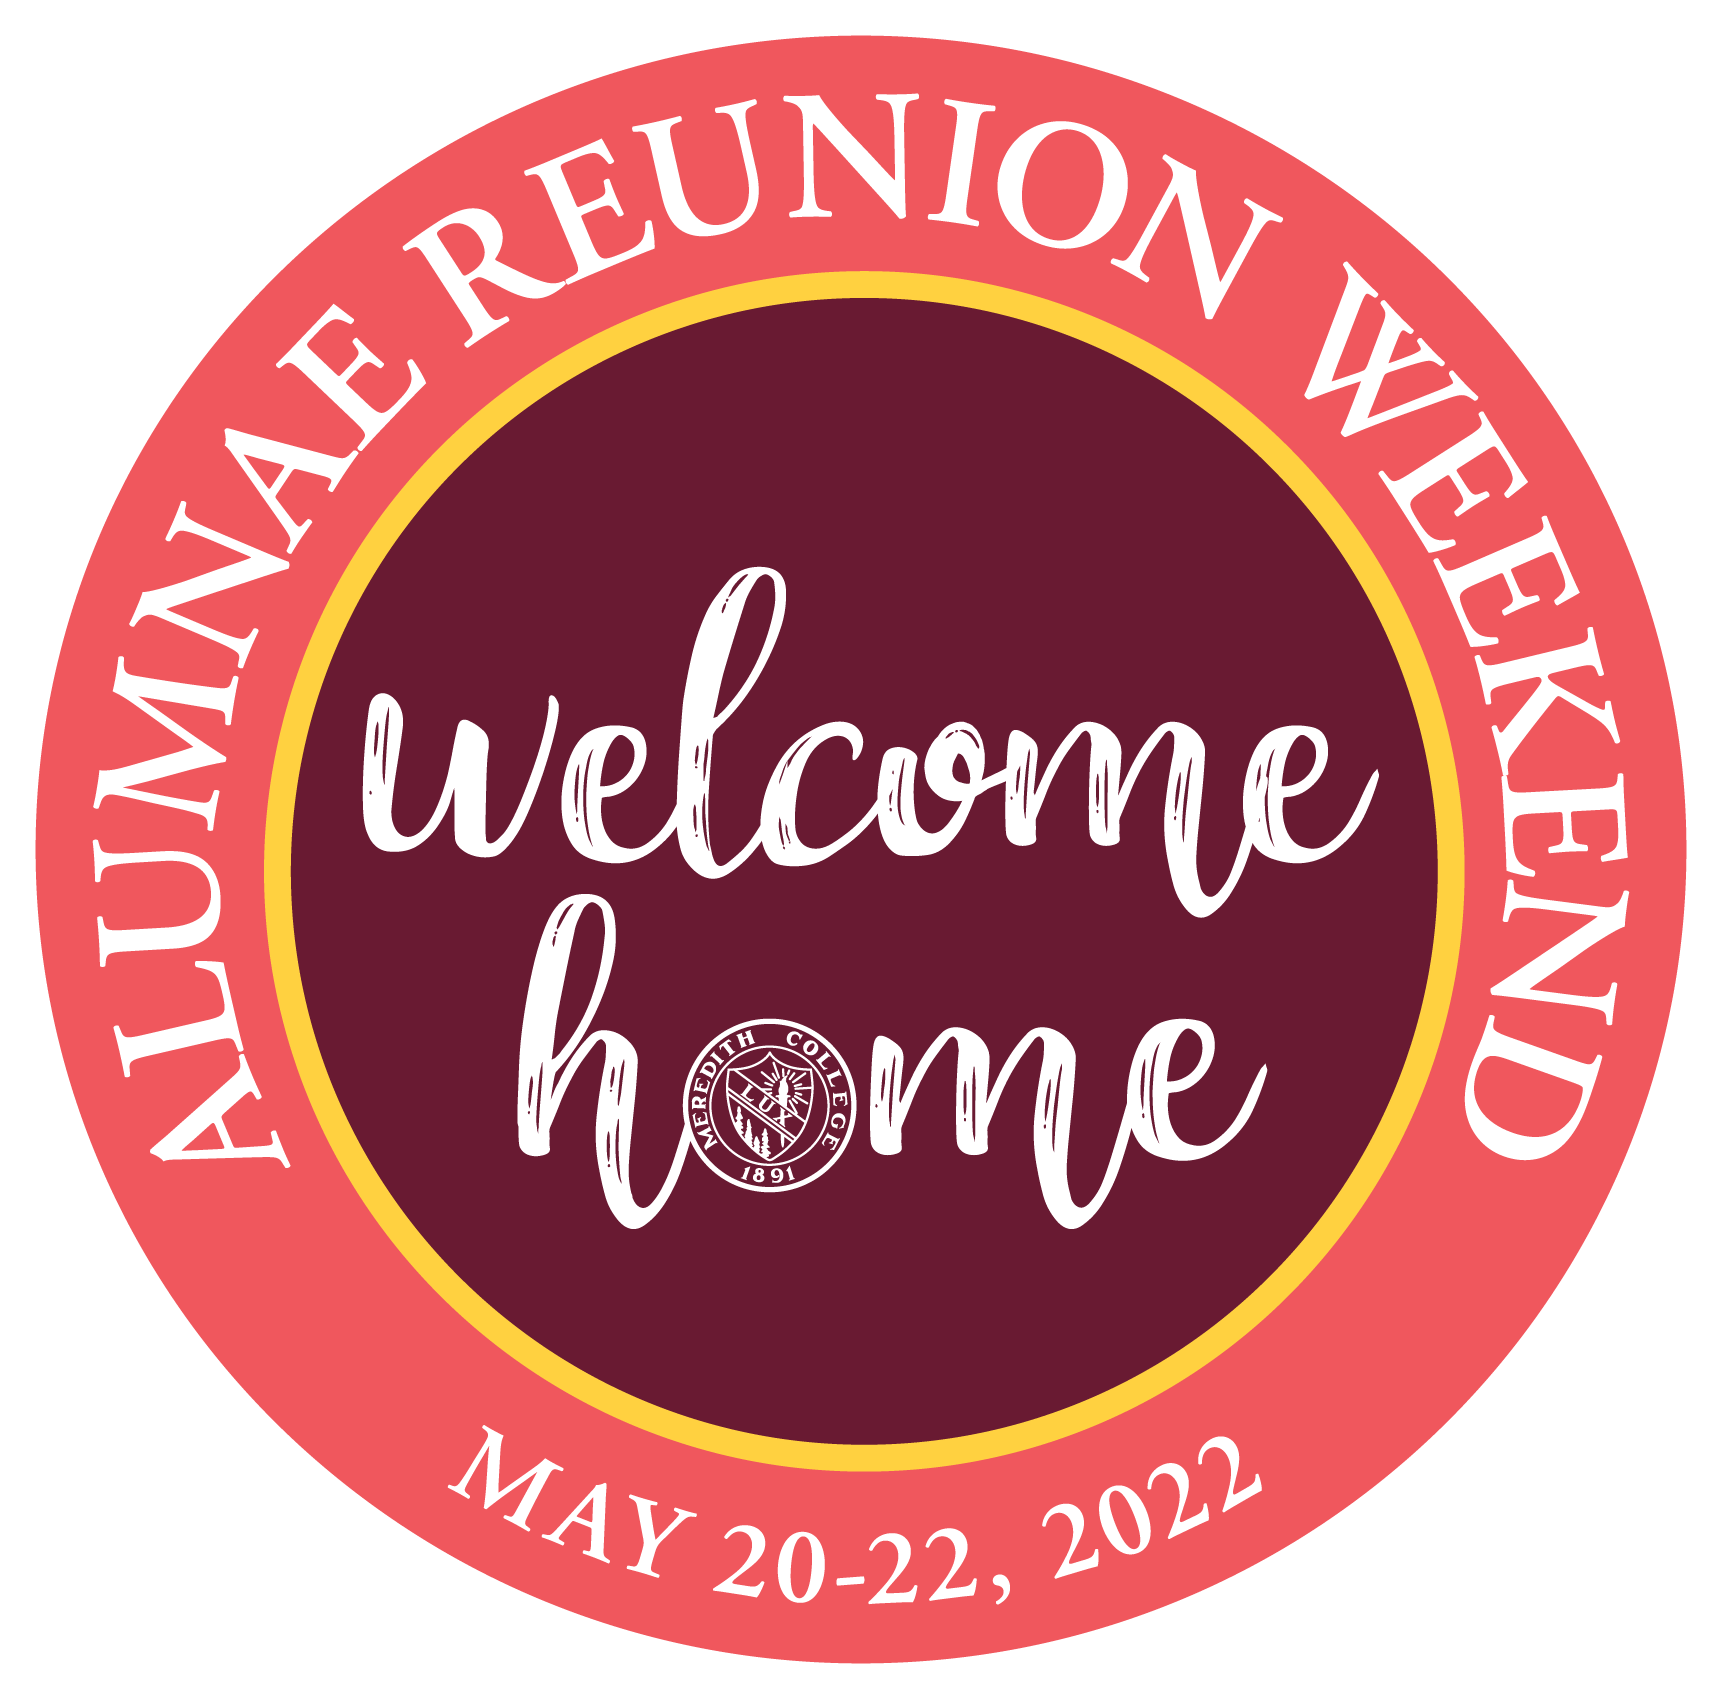 A logo for the Alumnae Reunion Weekend that says "Welcome home" in the center, and "May 20-22, 2022".